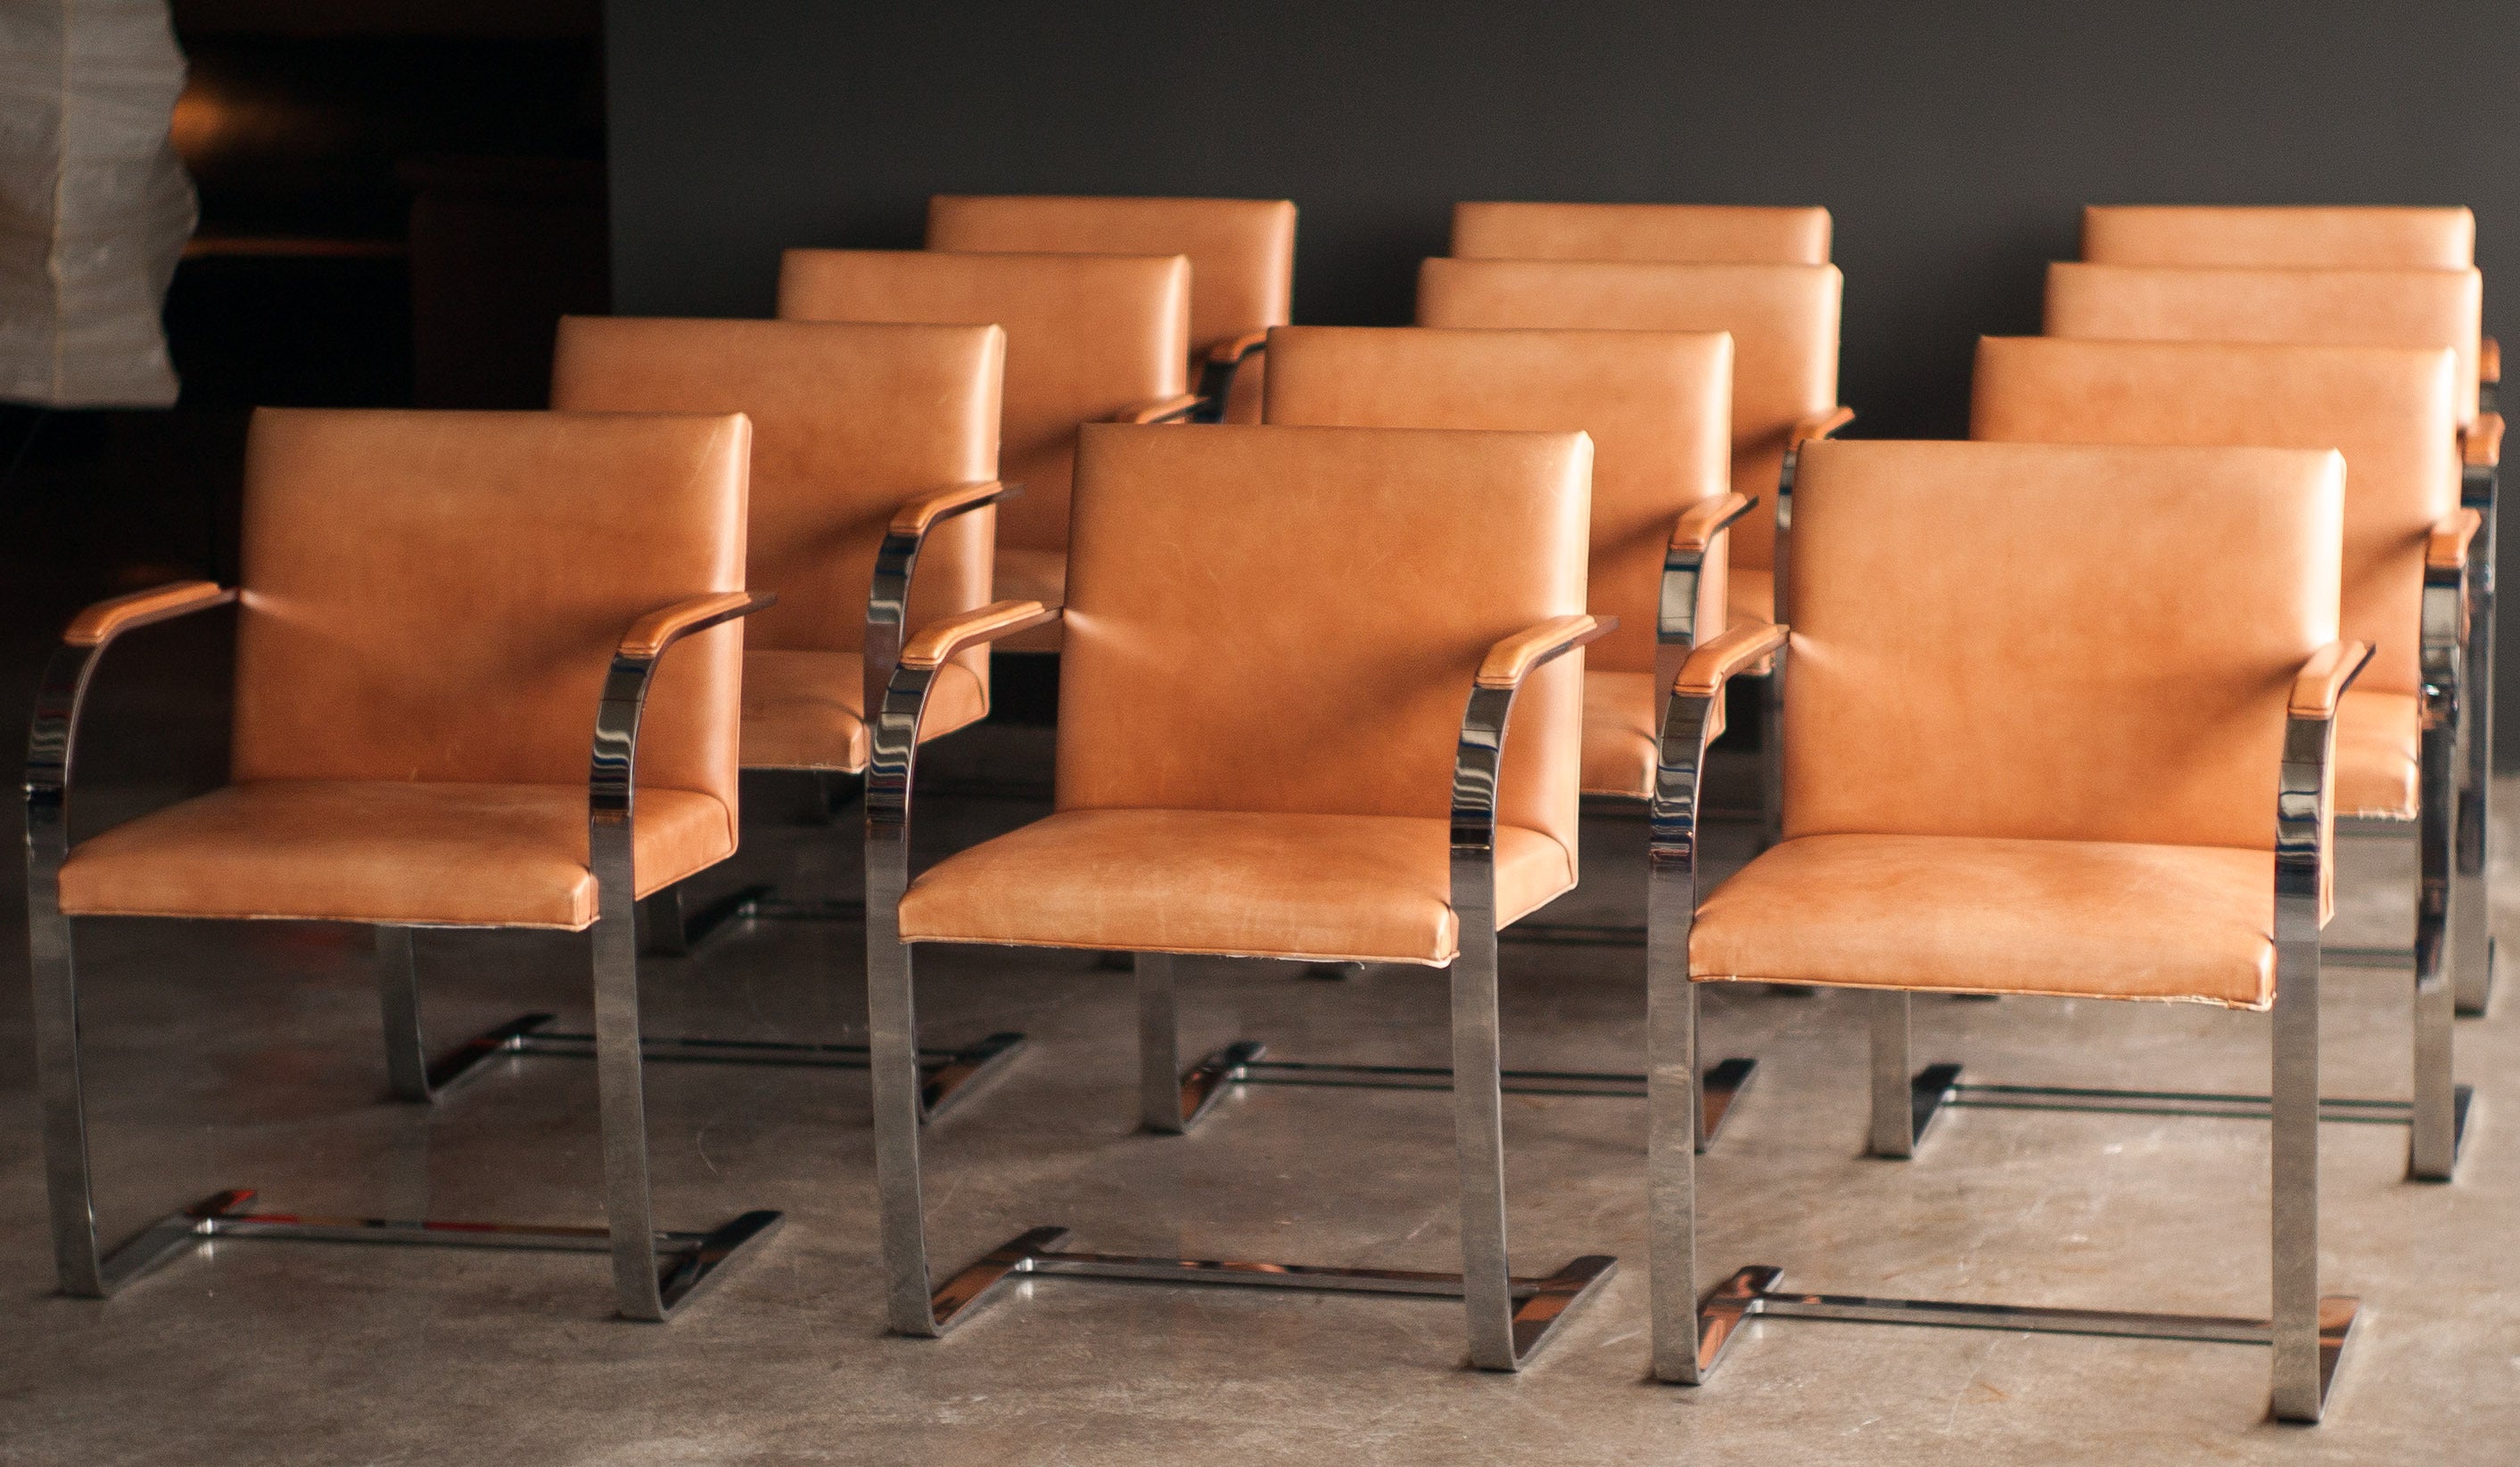 Set of 12 Knoll Brno chairs in original vintage Spinneybeck Saddle leather.